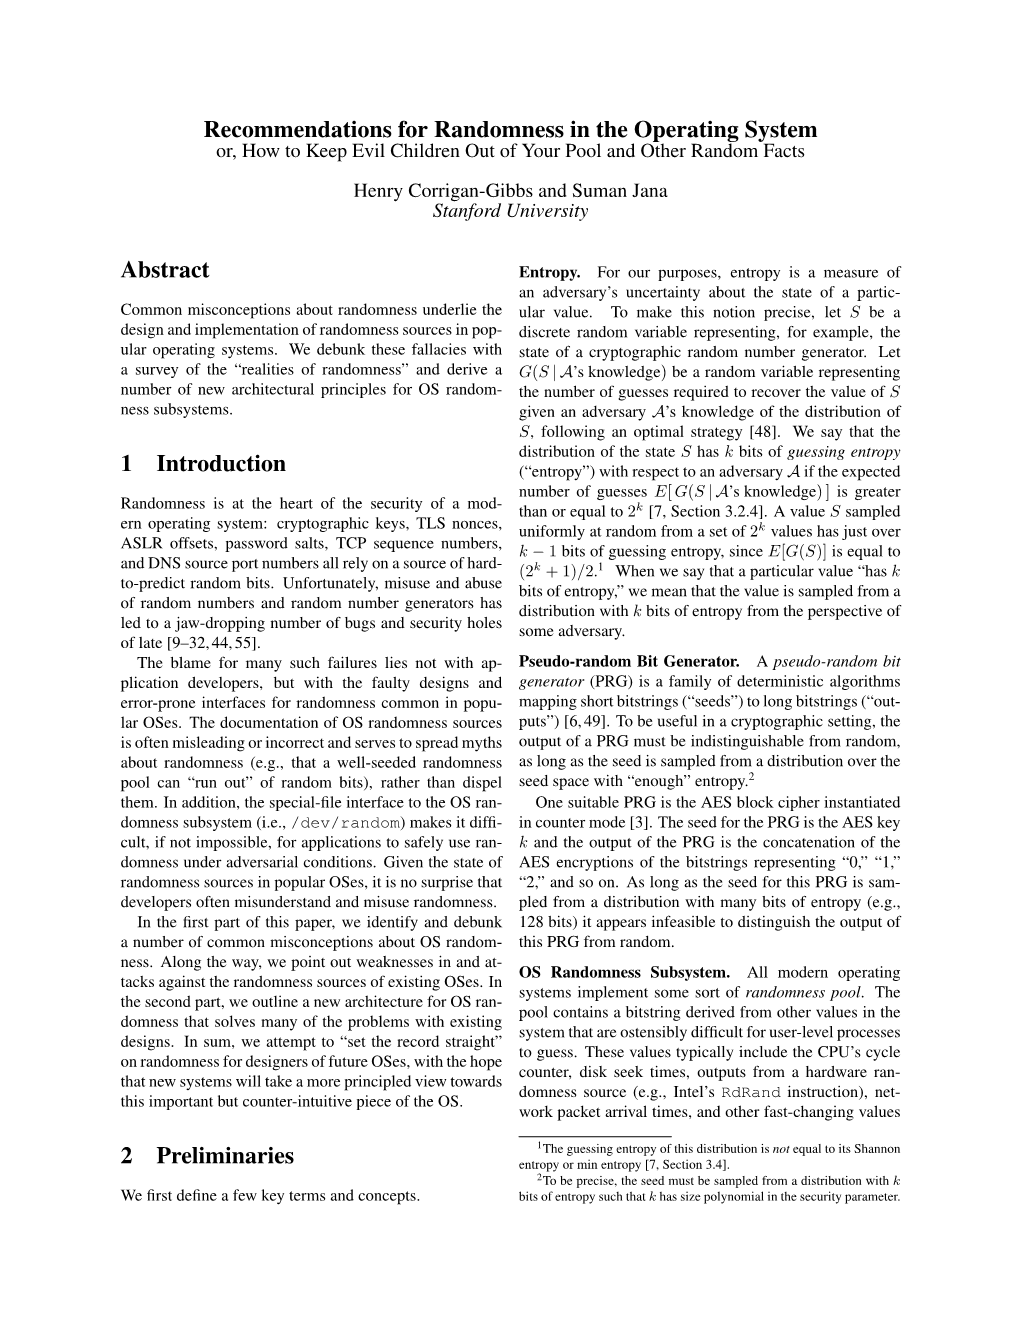 Recommendations for Randomness in the Operating System Abstract 1